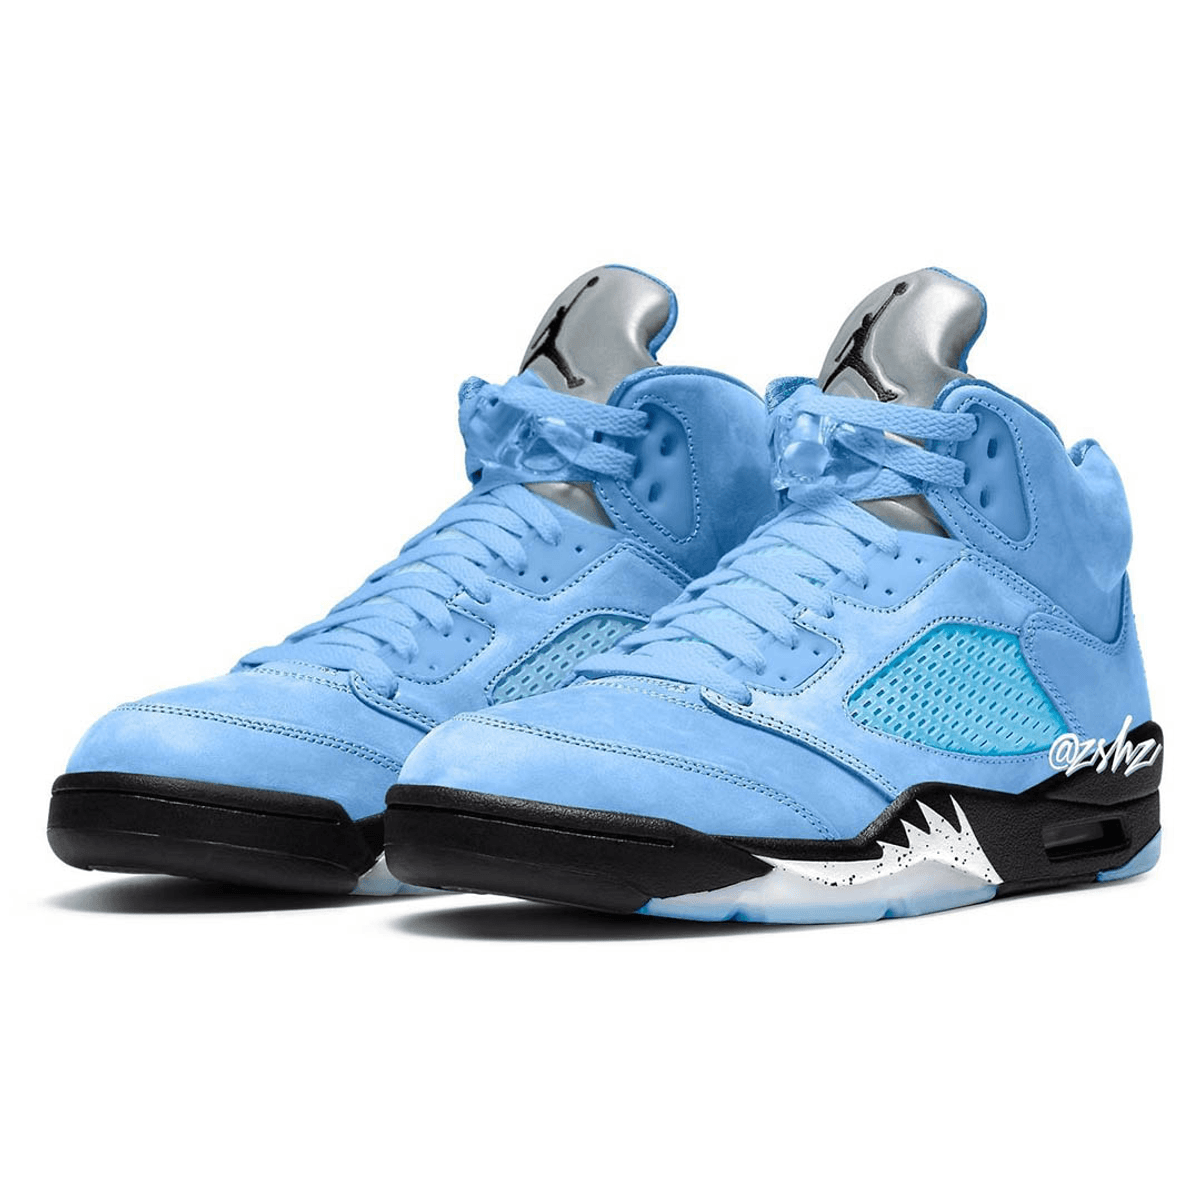 The Air Jordan 5 Is Getting The UNC Treatment March 2023